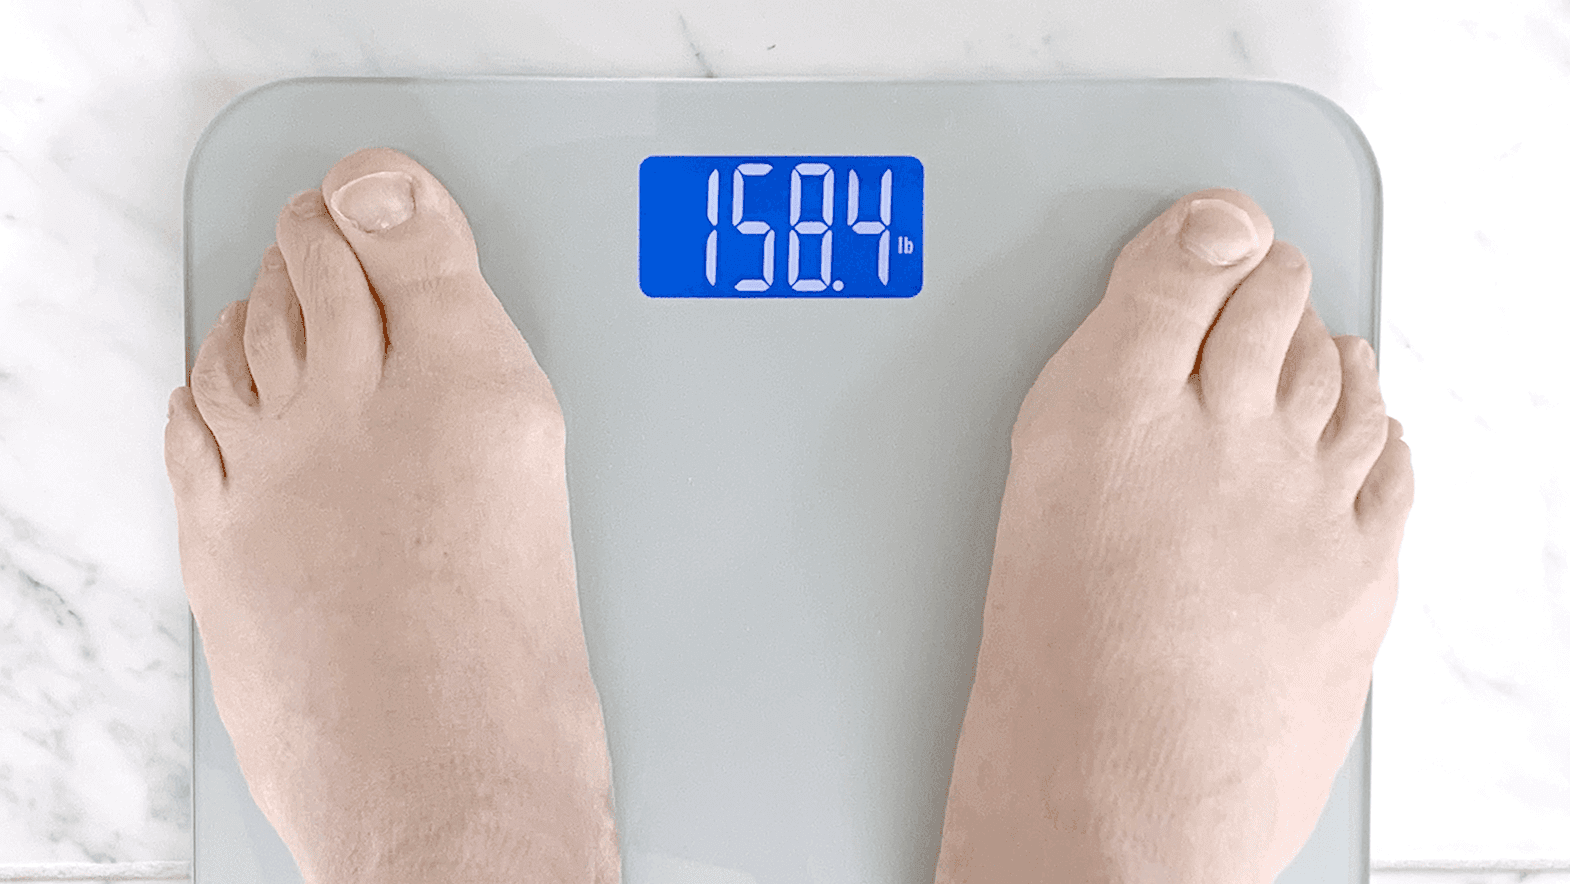 feet on a scale showing current weight